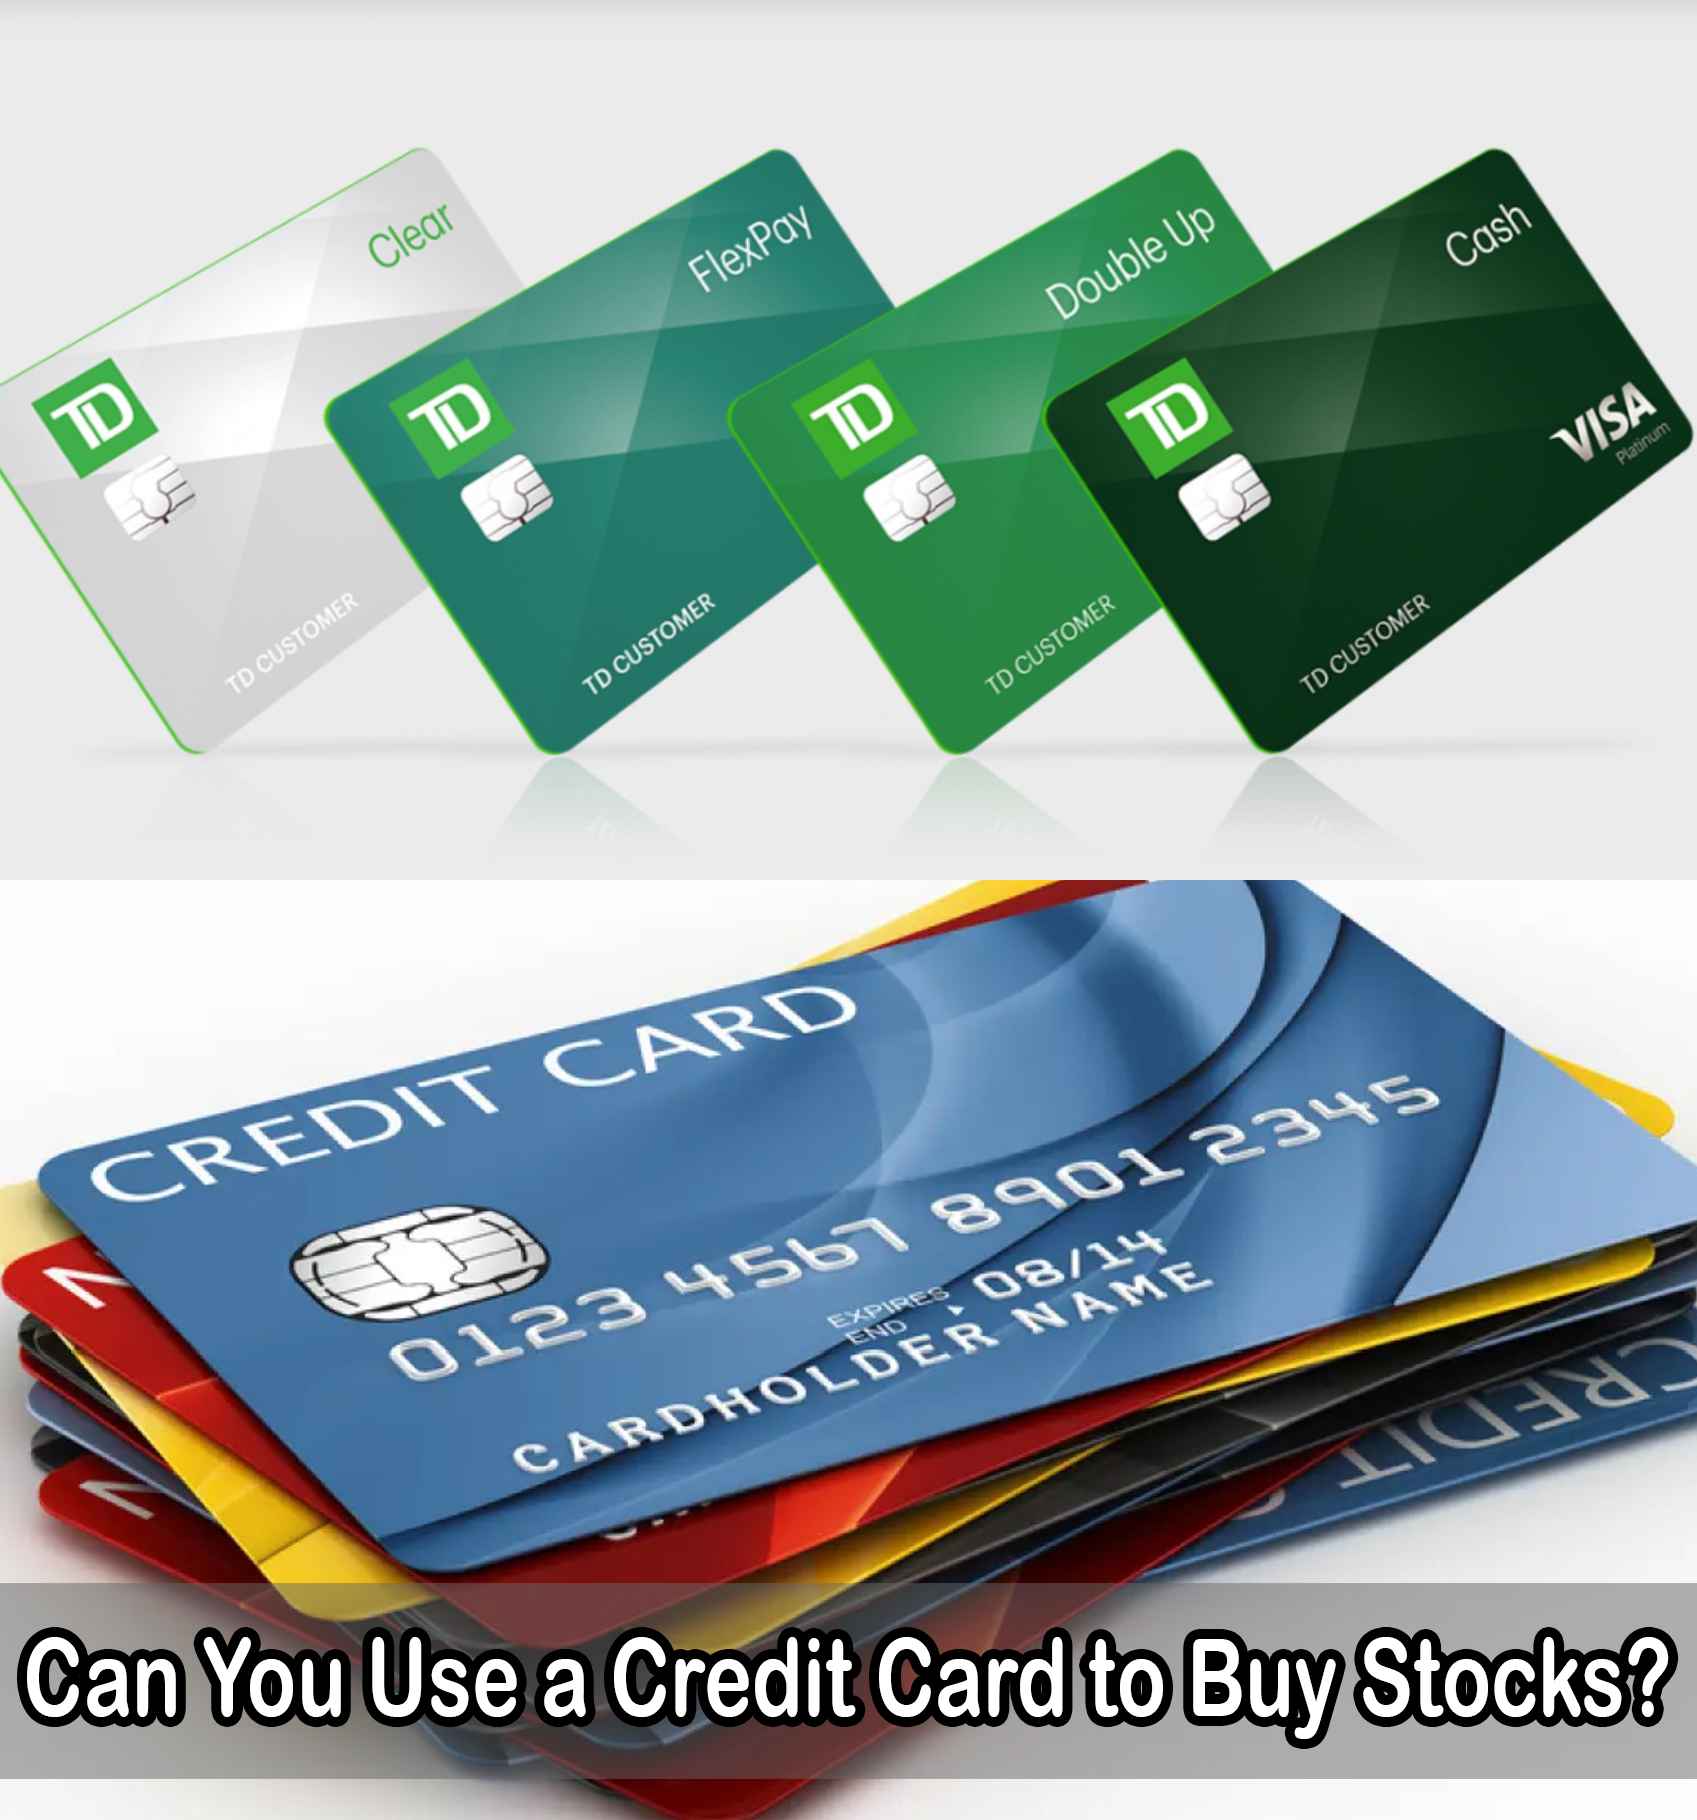 Can You Use a Credit Card to Buy Stocks?